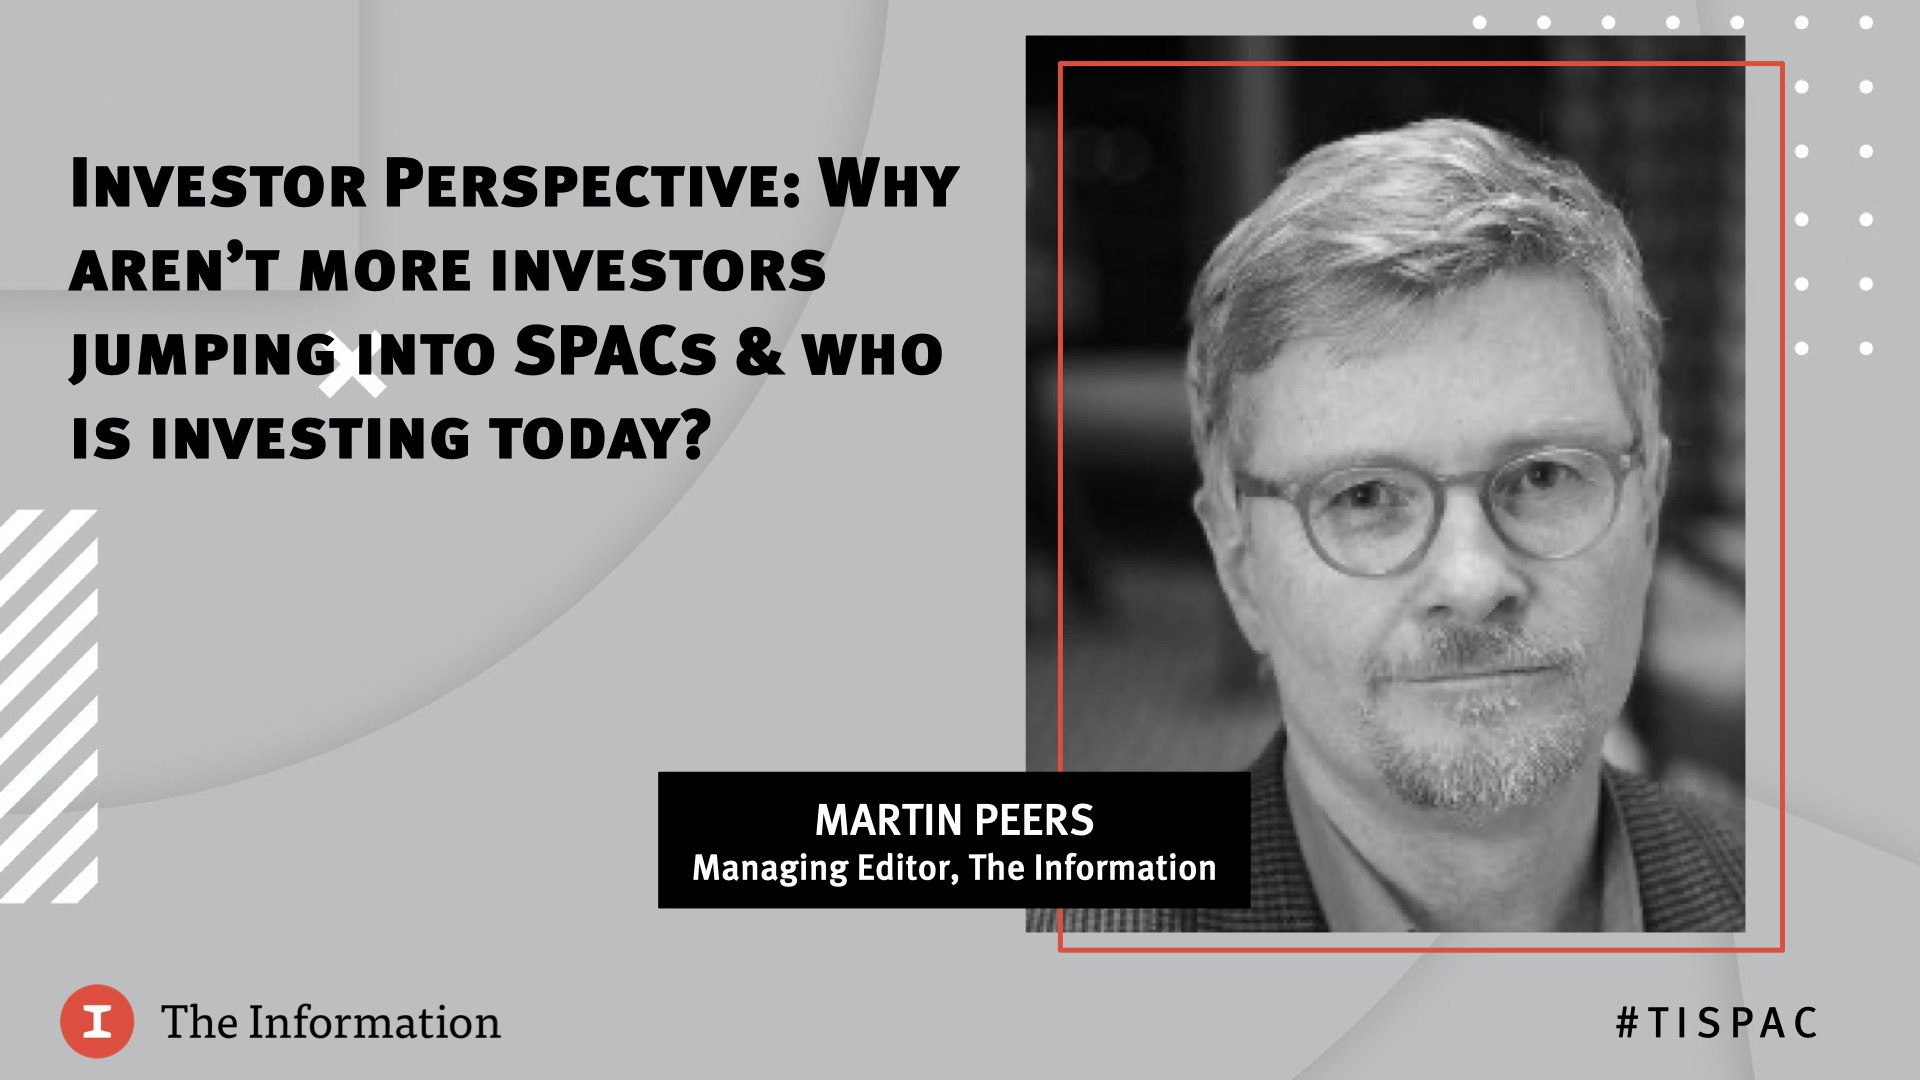 SPAC 2020 - Investor Perspective: Why aren’t more investors jumping into SPACs and who is investing today?